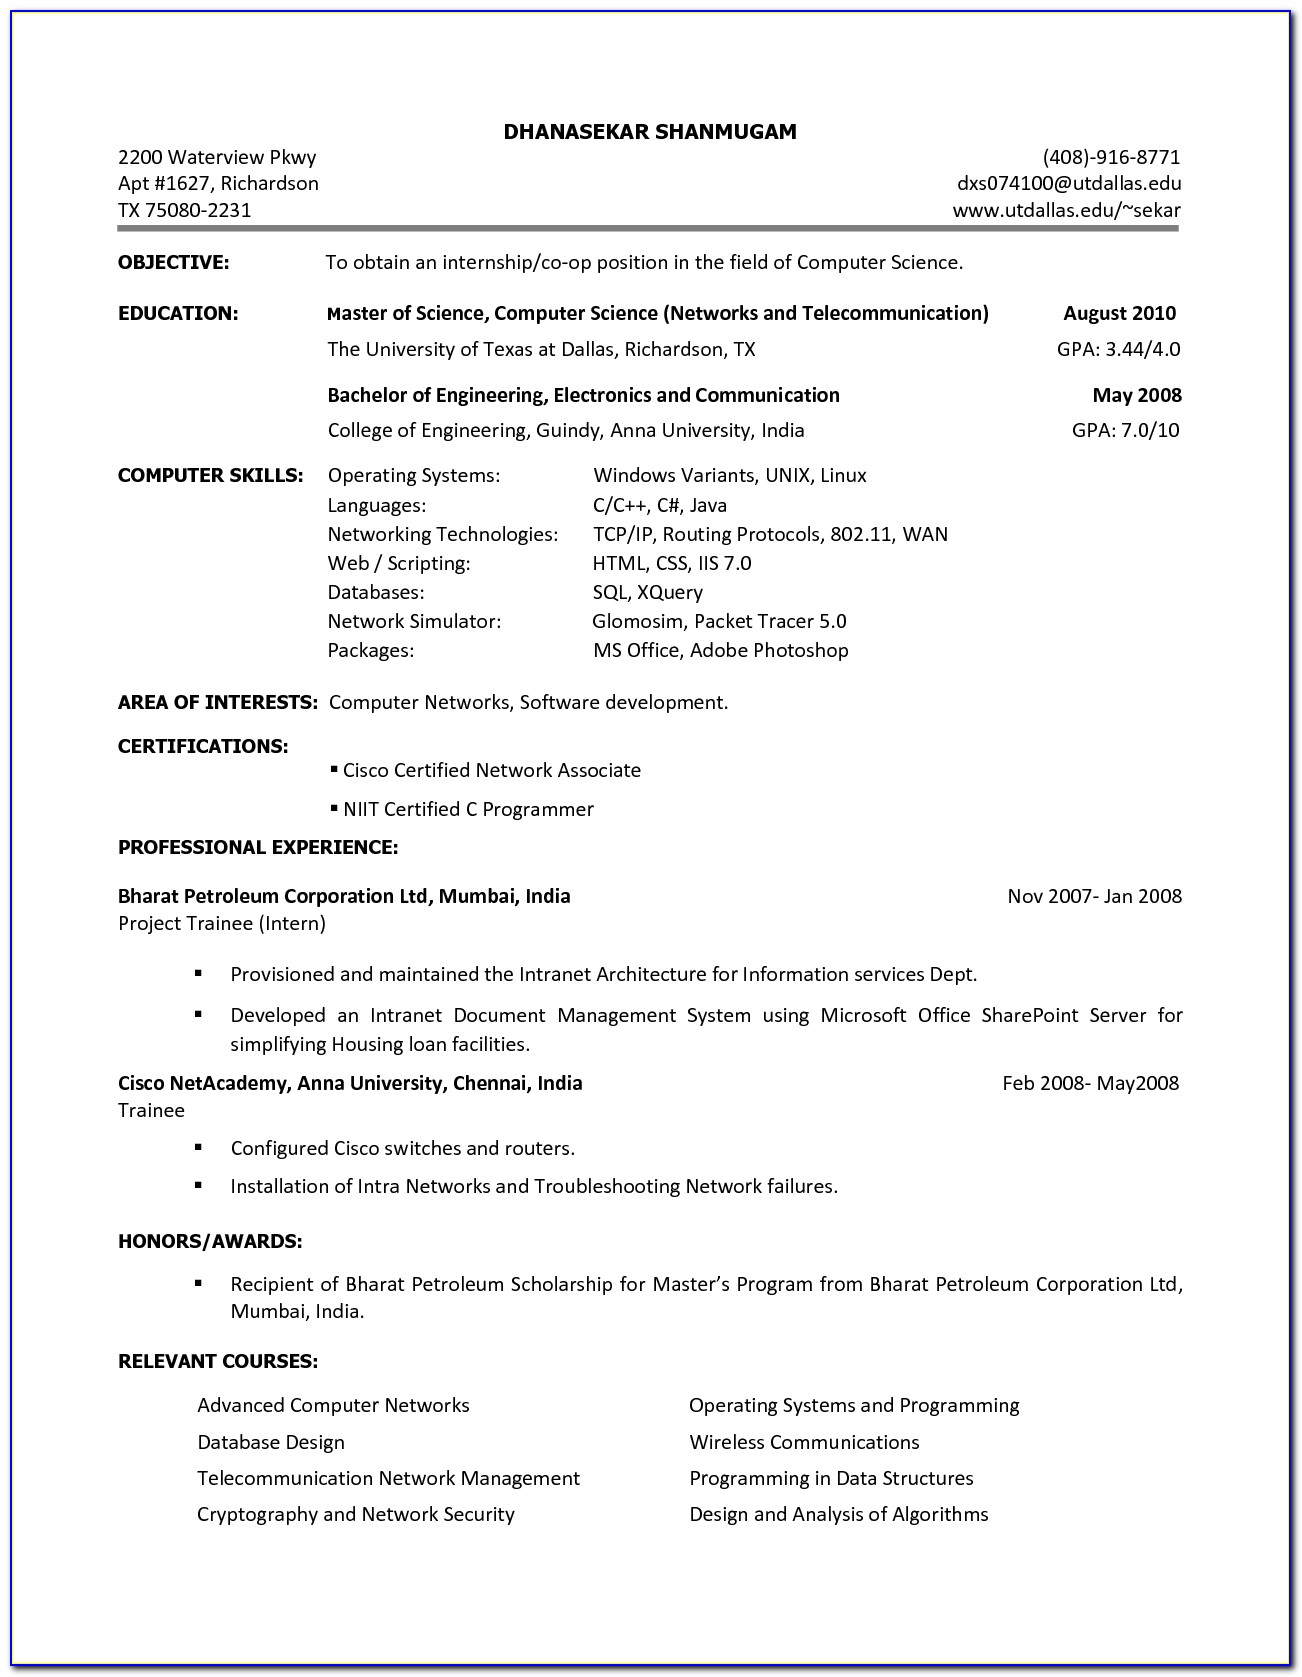 Free Resume Build And Download